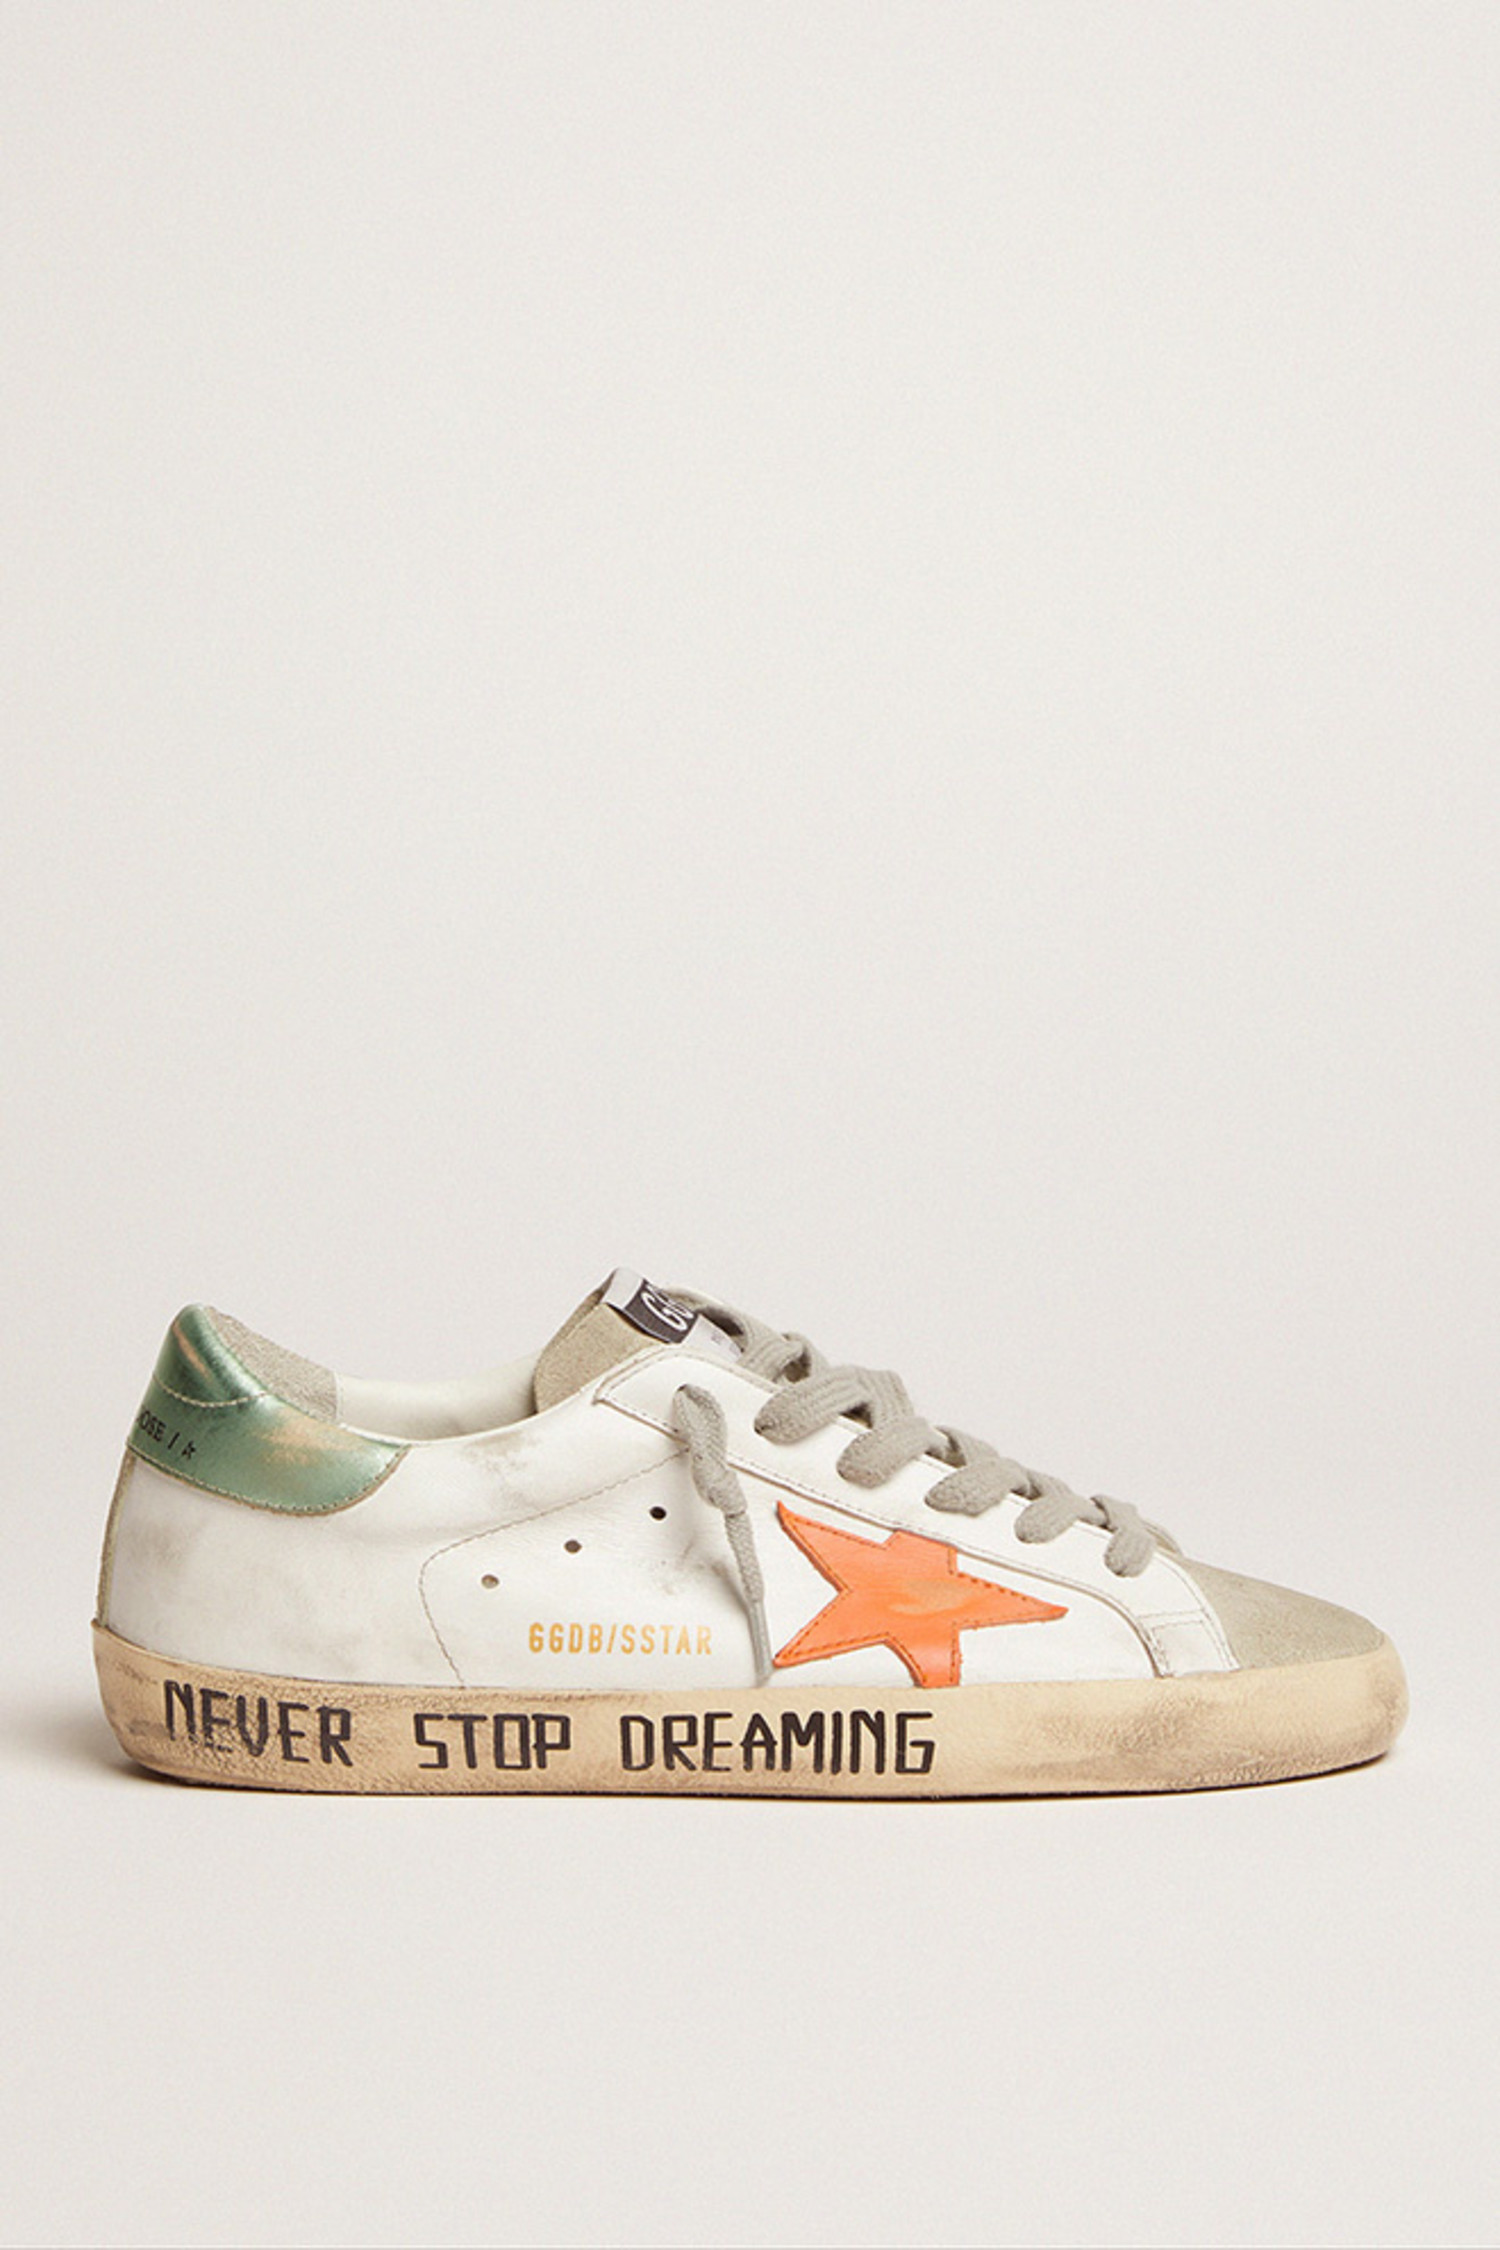 Golden Goose Golden Goose Super-Star - Leather Upper and Star with Suede  Toe and Laminated Heel - White/ Orange/ Pastel Green